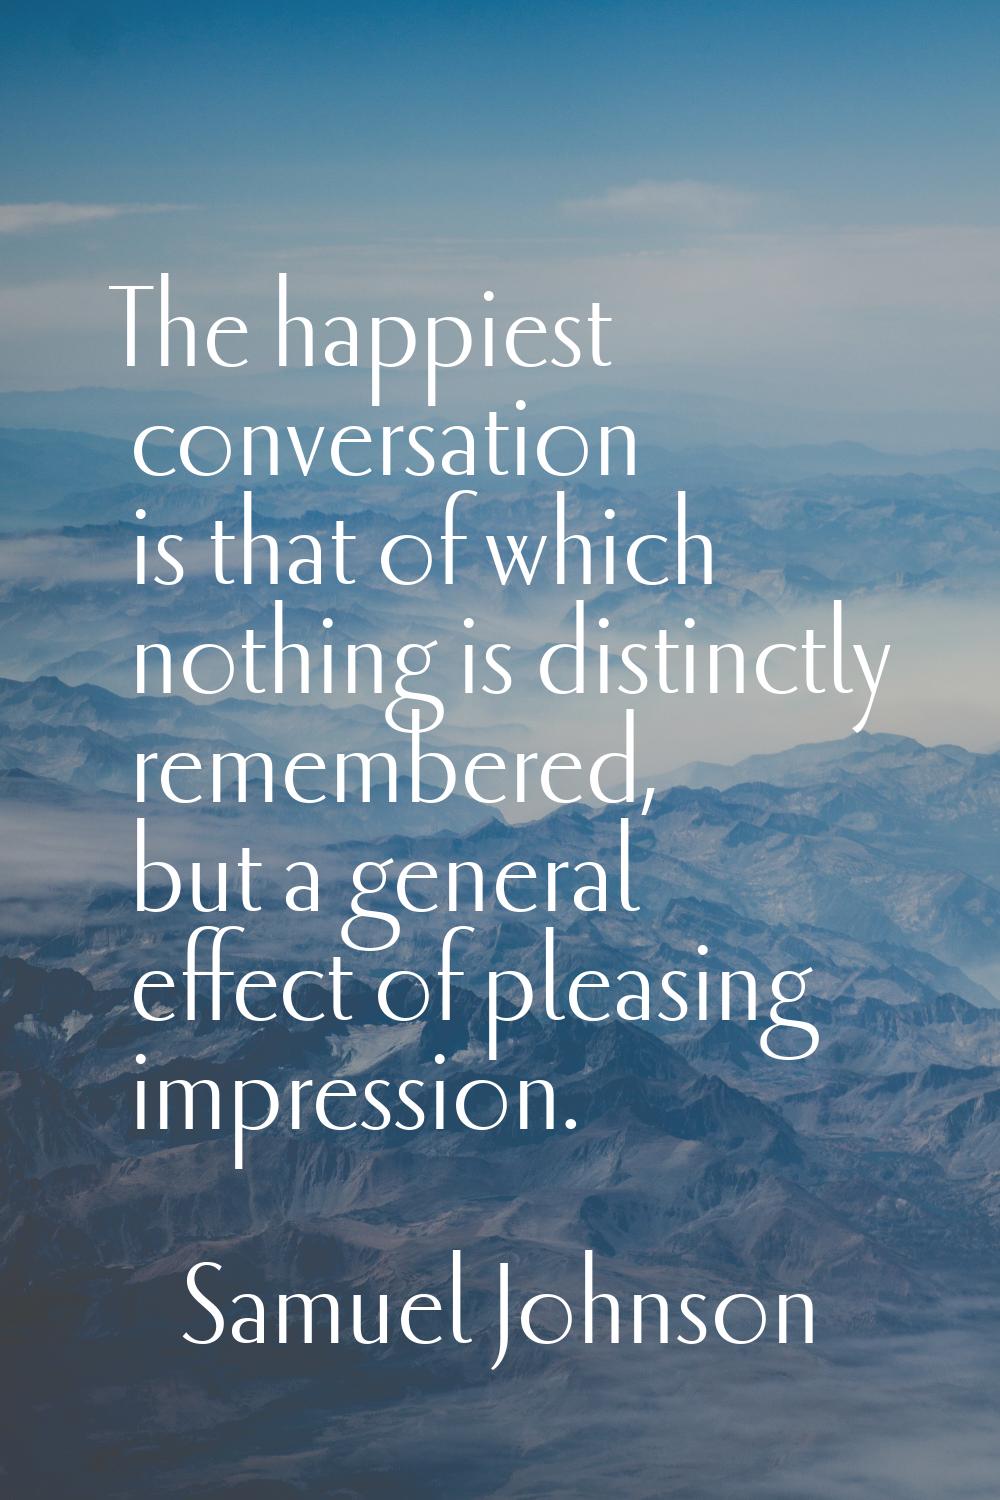 The happiest conversation is that of which nothing is distinctly remembered, but a general effect o